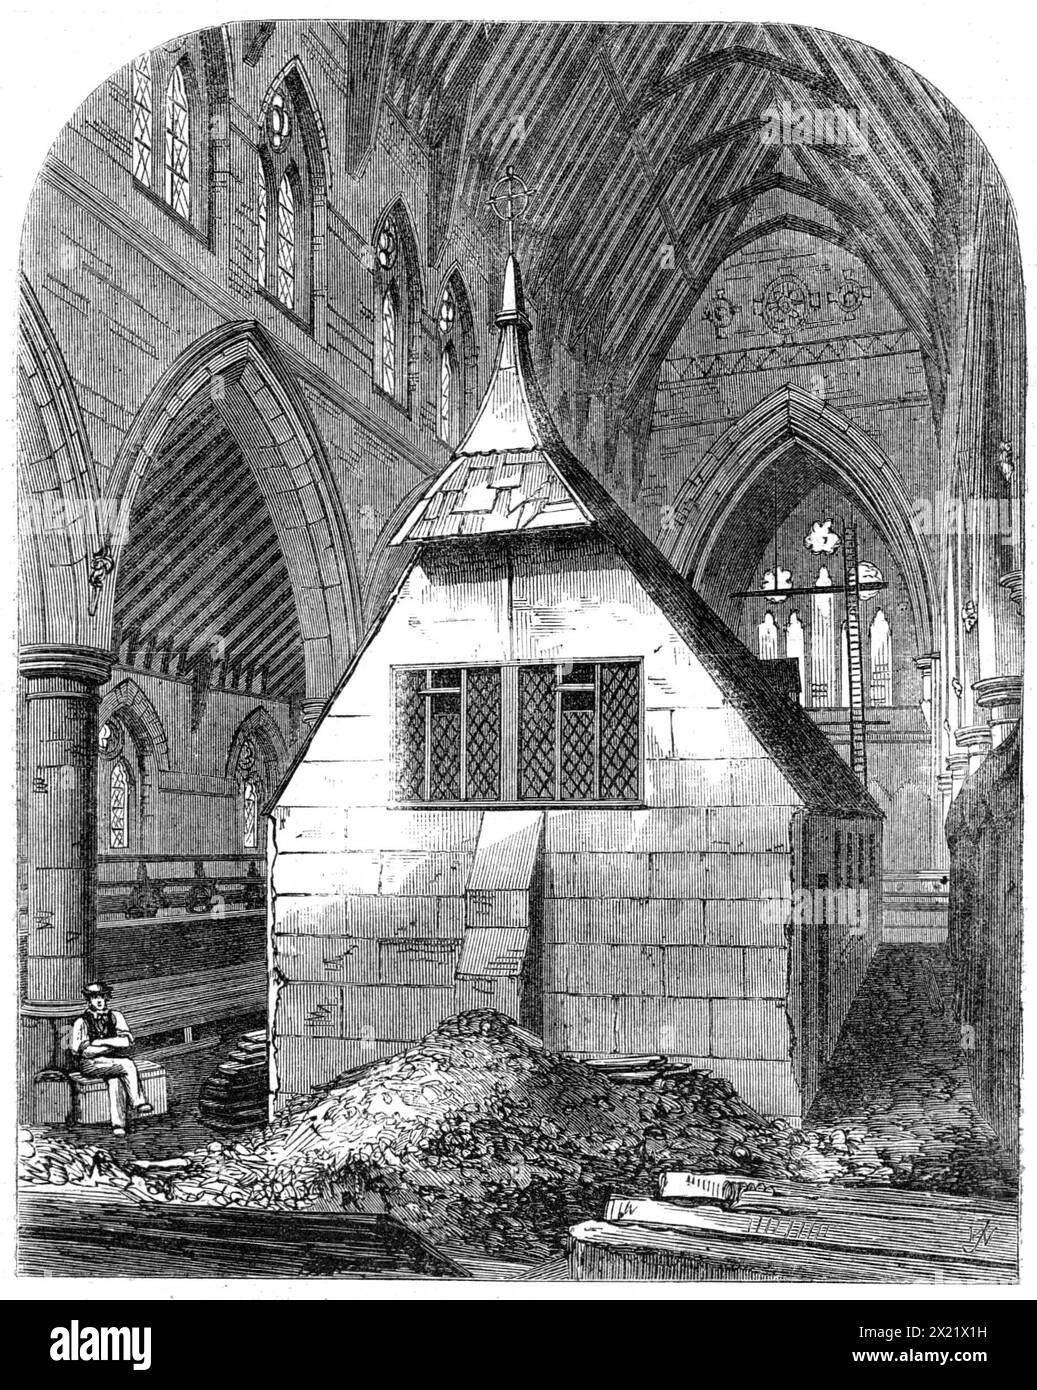 Temporary church within St. Michael and All Angels, Shoreditch, [London], 1865. A '...view of the interior as it appeared a few months ago, while the work of its construction was going on over the temporary building in which the services of the Church have been carried on during the last two years. We believe the only known precedent for this singular expedient of placing the temporary church in the midst of the rising walls of the intended permanent edifice is to be found in the history of the building of York Minster. Architecturally, it is perhaps one of the finest churches lately built in Stock Photo